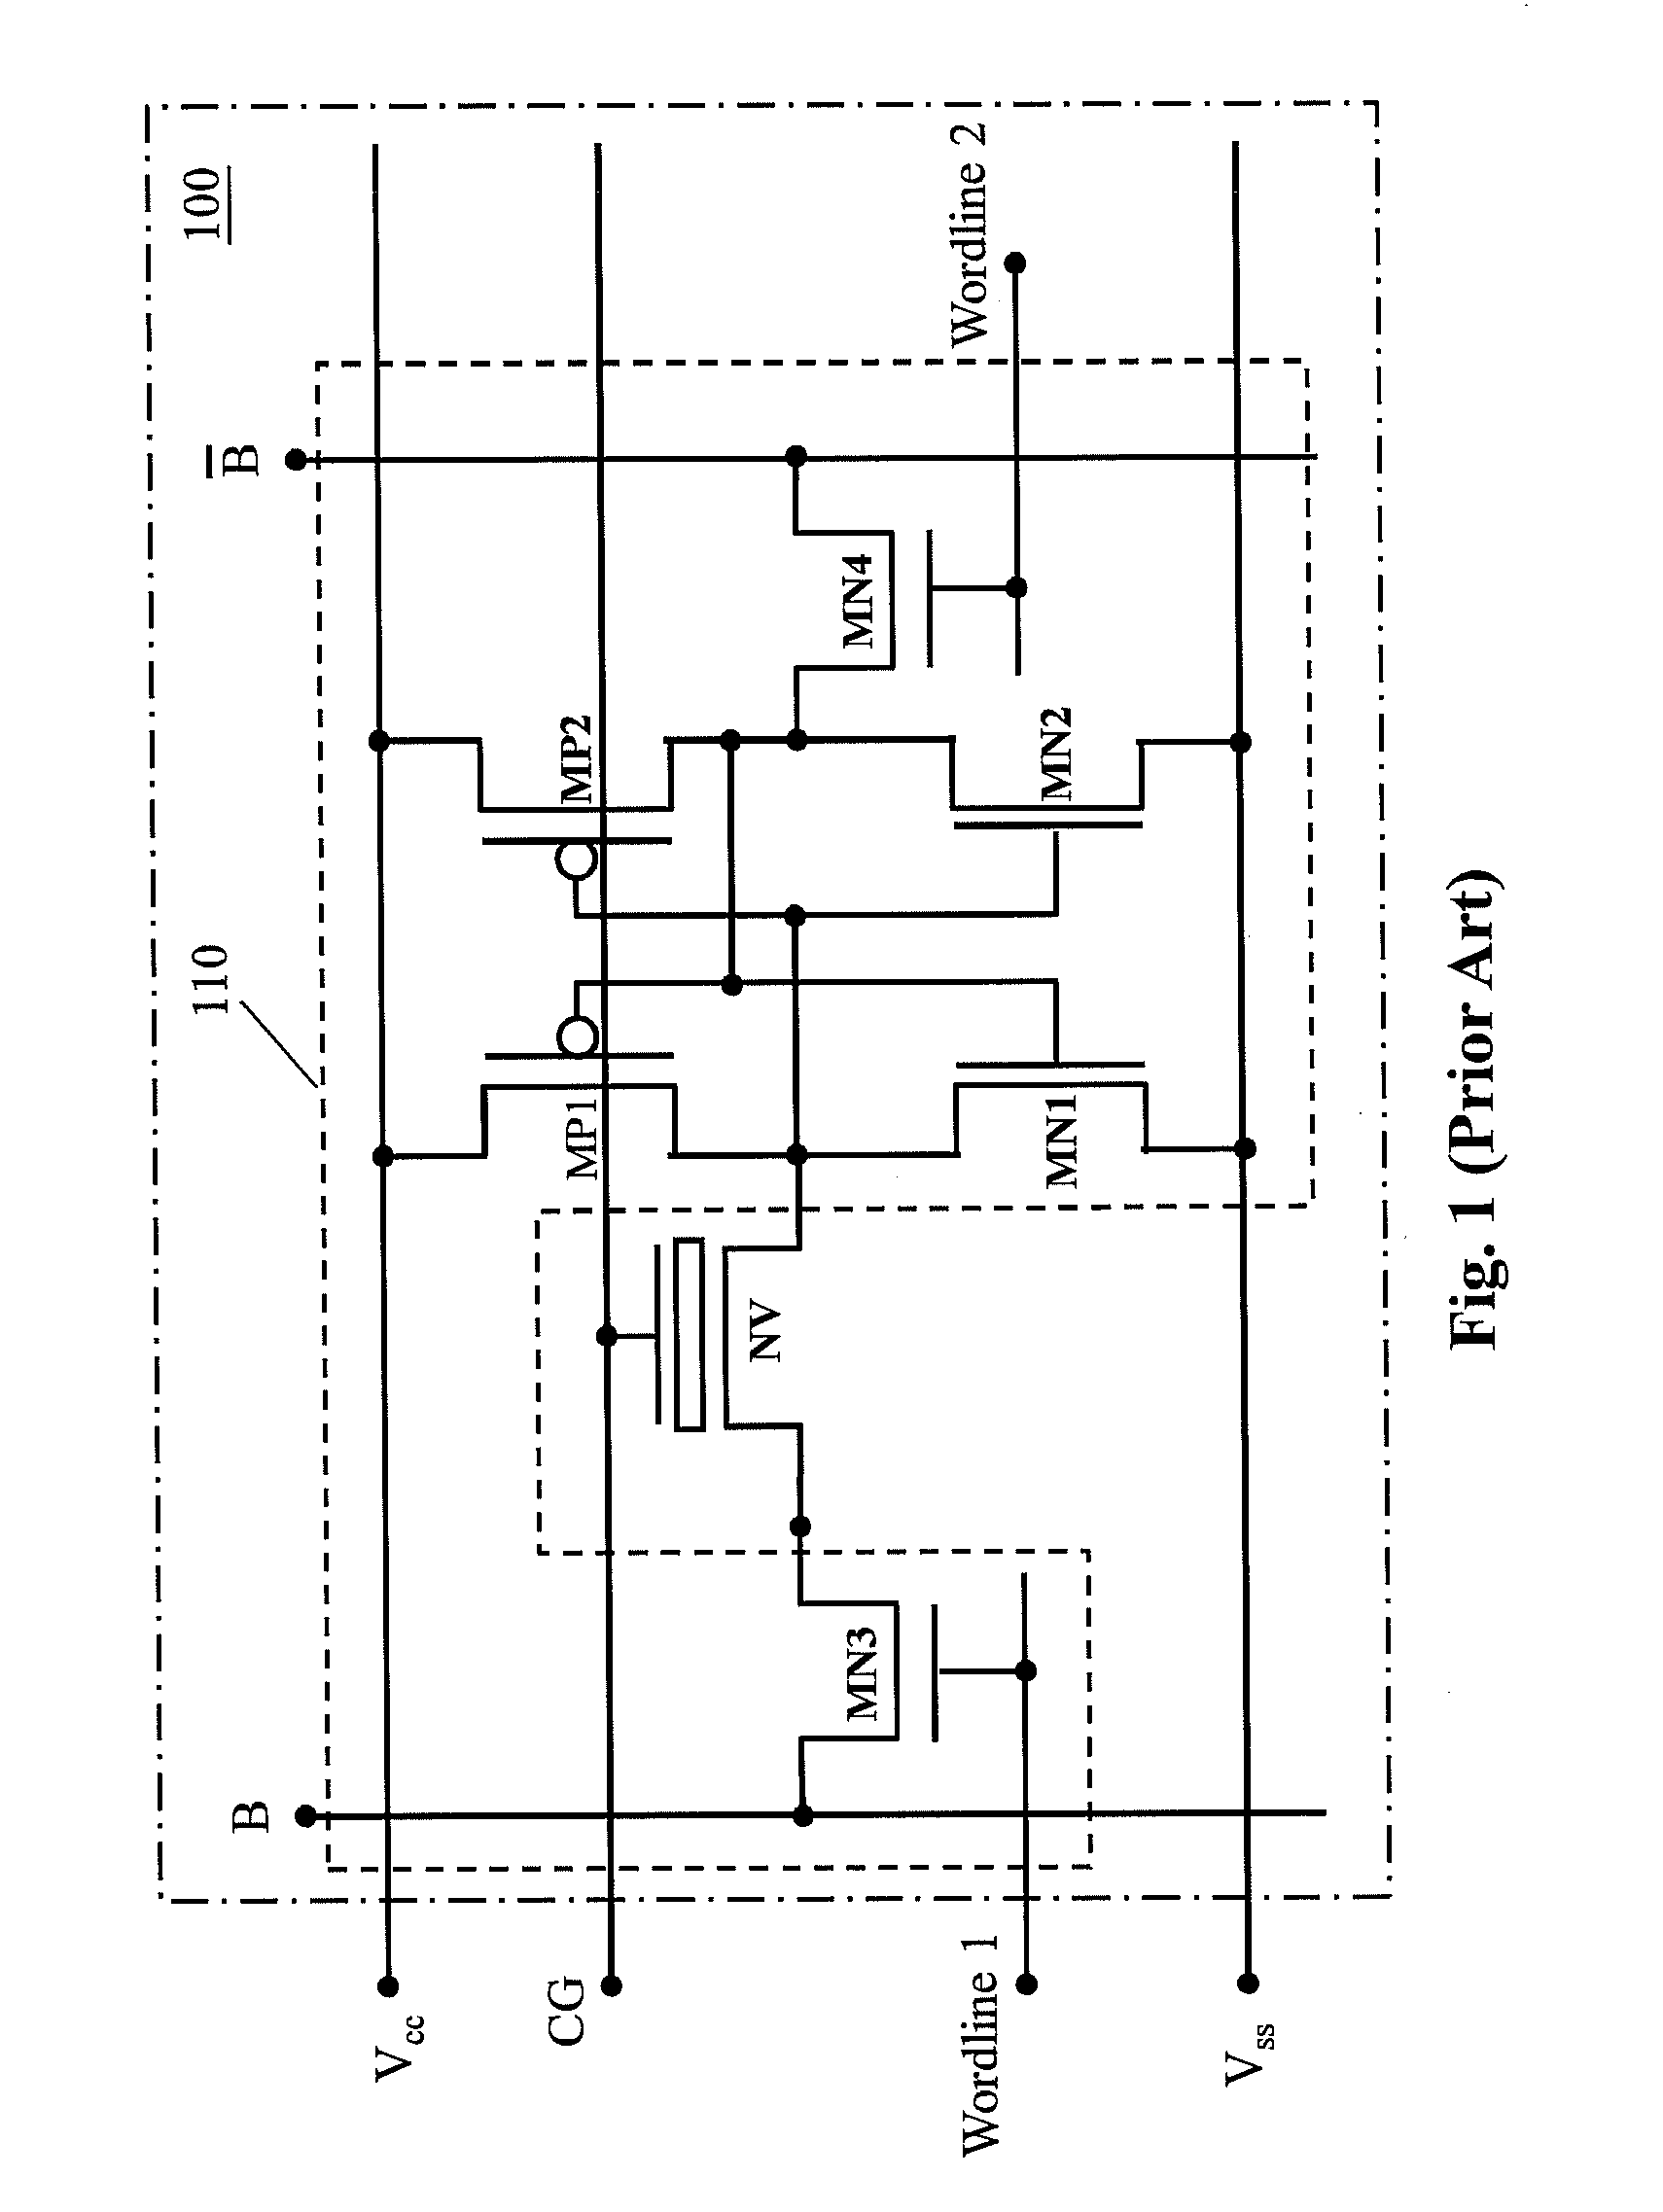 Non-volatile static random access memory devices and methods of operations